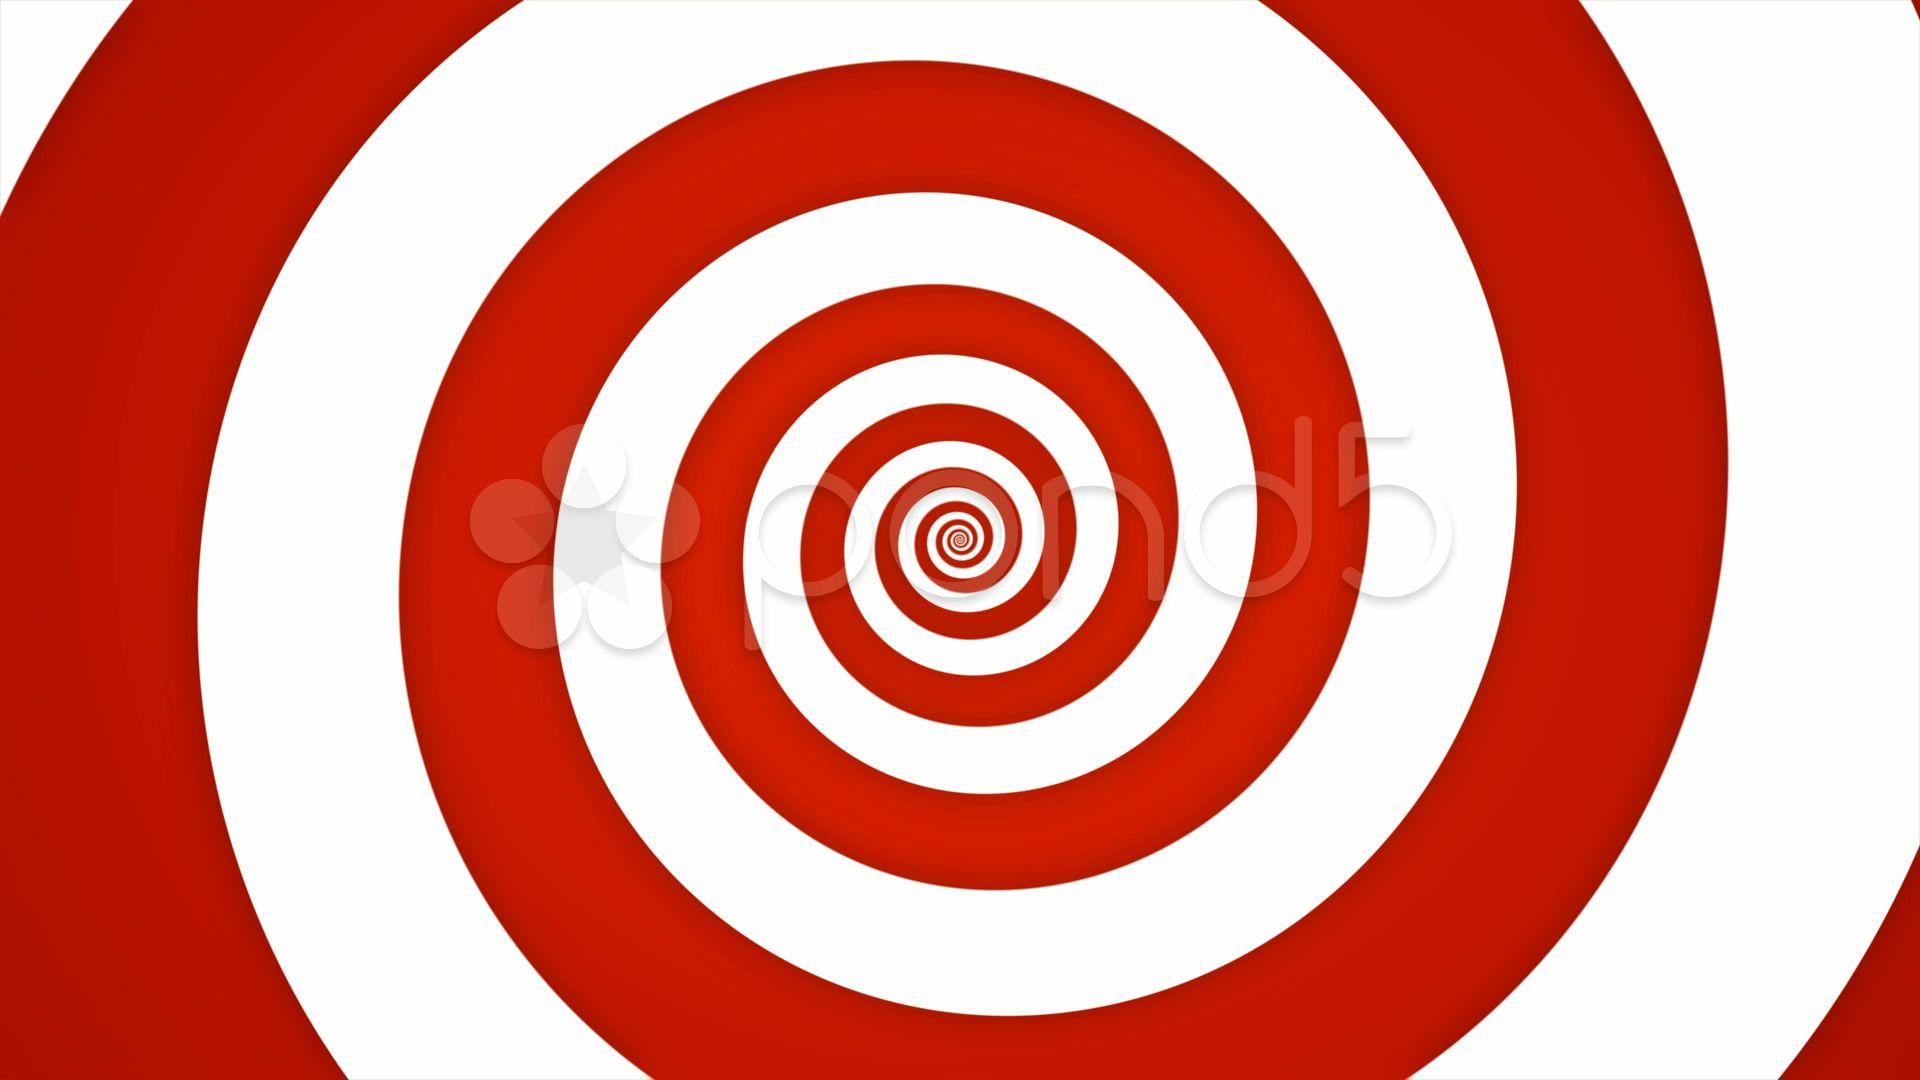 Red and White Swirl Logo - Stock Video: Red And White Swirl Buy Now